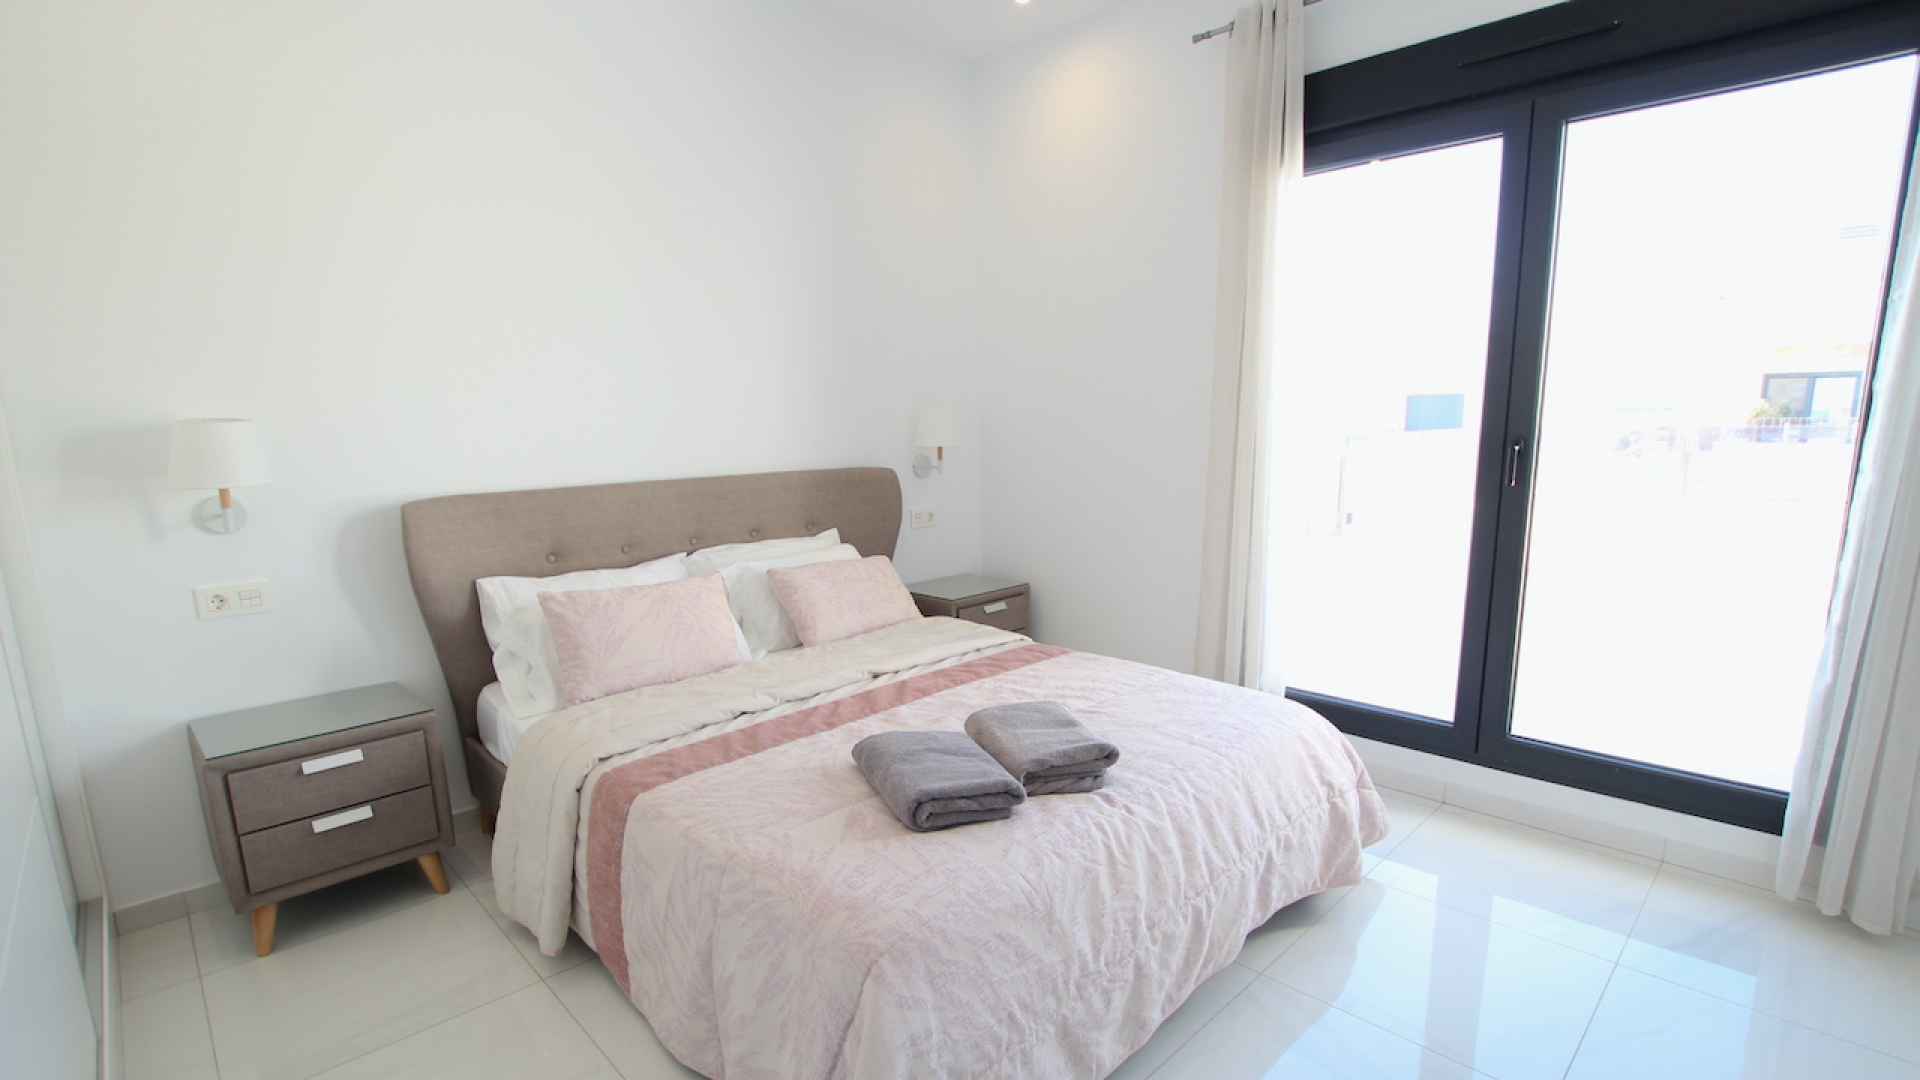 48308_stunning_3_bedroom_villa_in_a_highly_sough_after_location_201223102906_img_5096